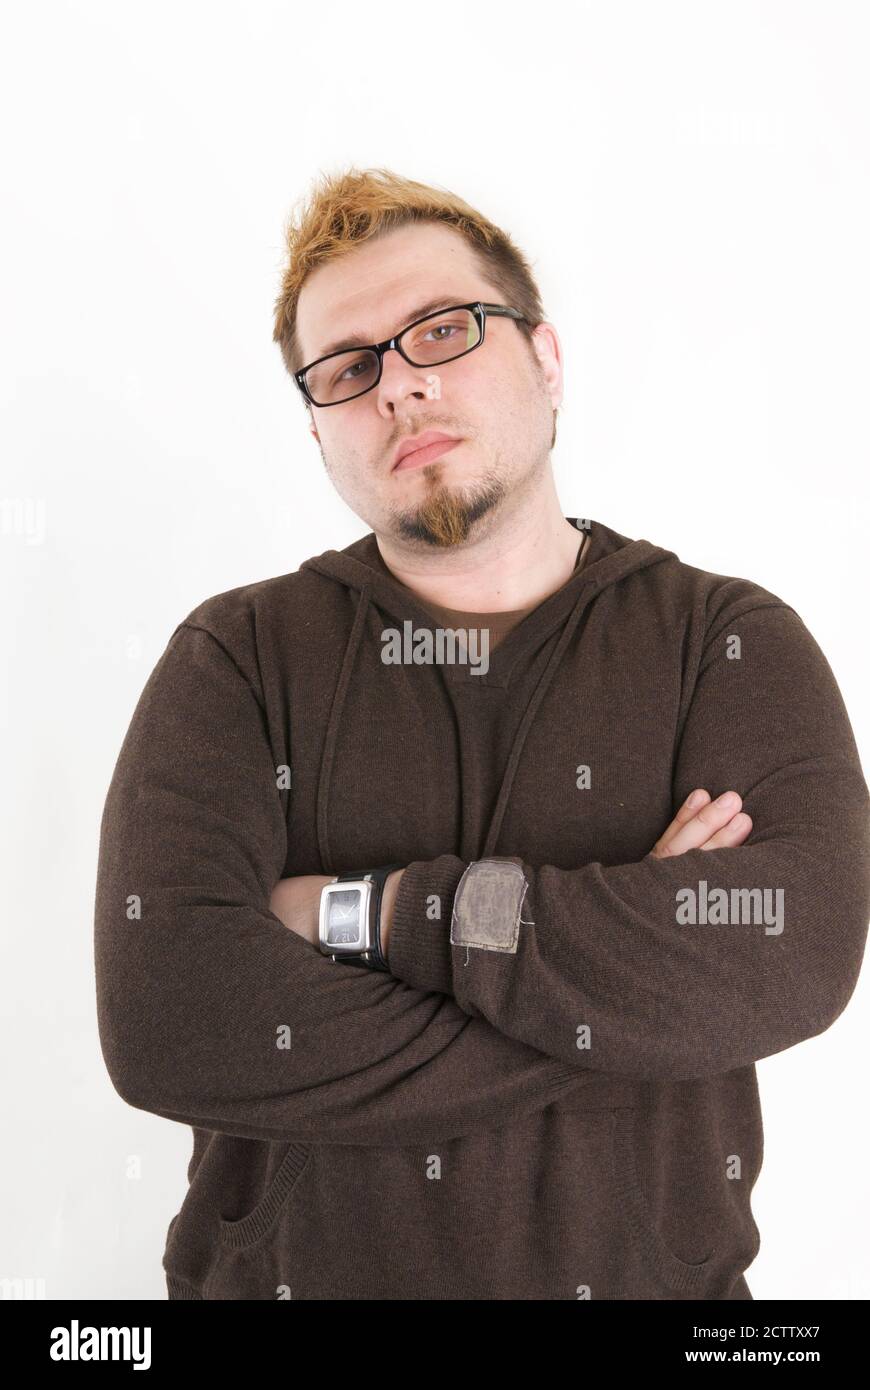 Man with glasses and brown sweatshirt Stock Photo